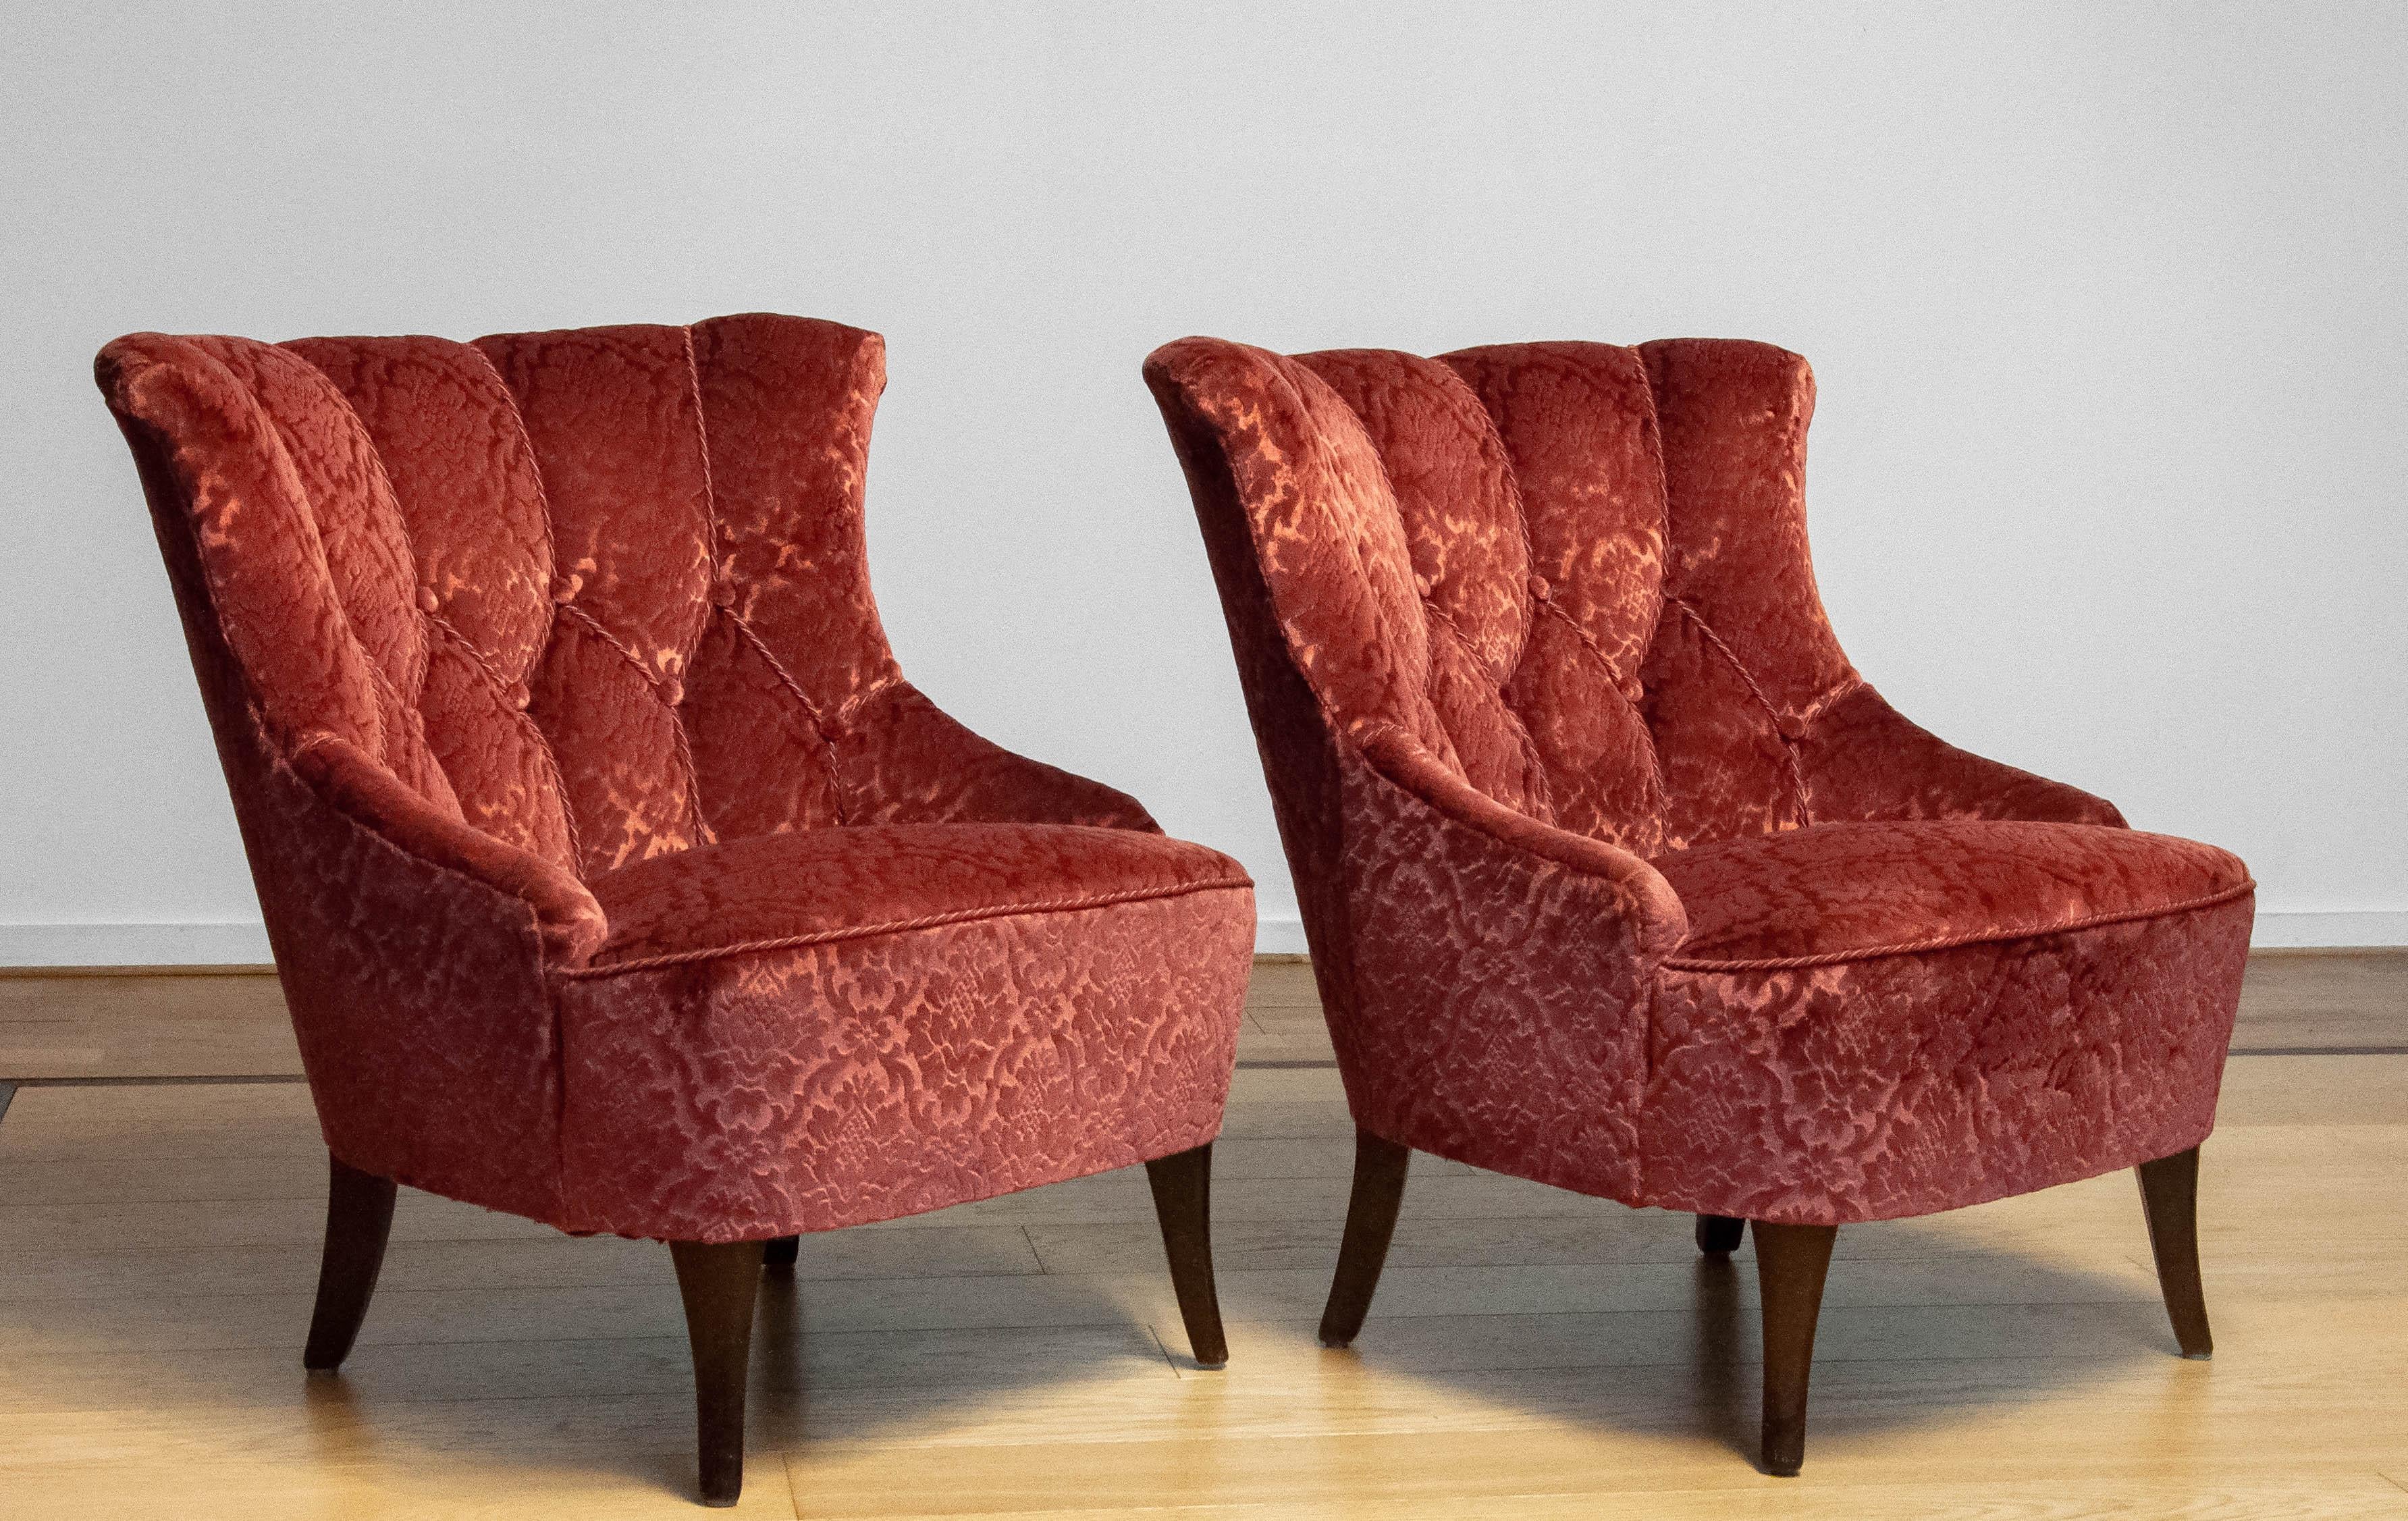 Beautiful ( Scandinavian ) Napoleon lll chairs.
The chairs are both reupholstered with the brique ton sur ton jacquard velvet in the 1970s. Webbing and springs are all in good condition.
Overall the chairs sits and supports good, fabric is very